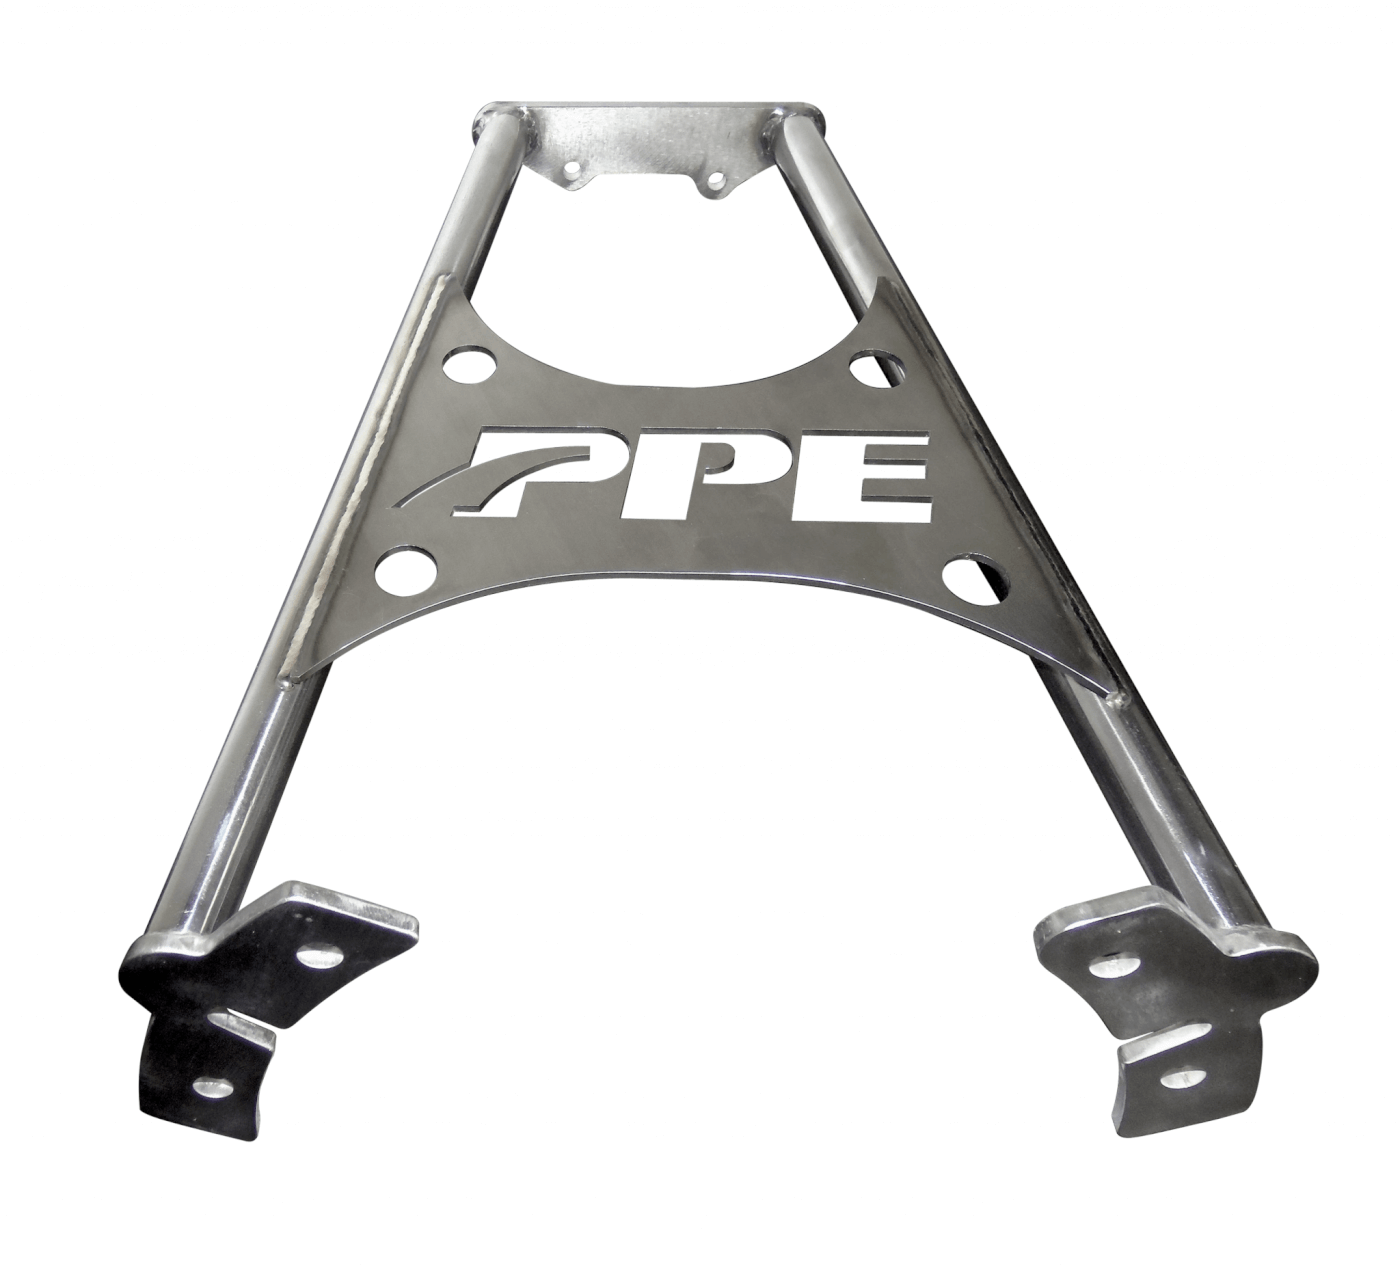 27. The fabricated stainless steel brace has CNC laser cut brackets and 7/8” tubes for optimal strength and durability. The stainless steel brace will resist rust and corrosion from any road debris and weather and can be installed with basic hand tools without removing the transmission or transfer case.